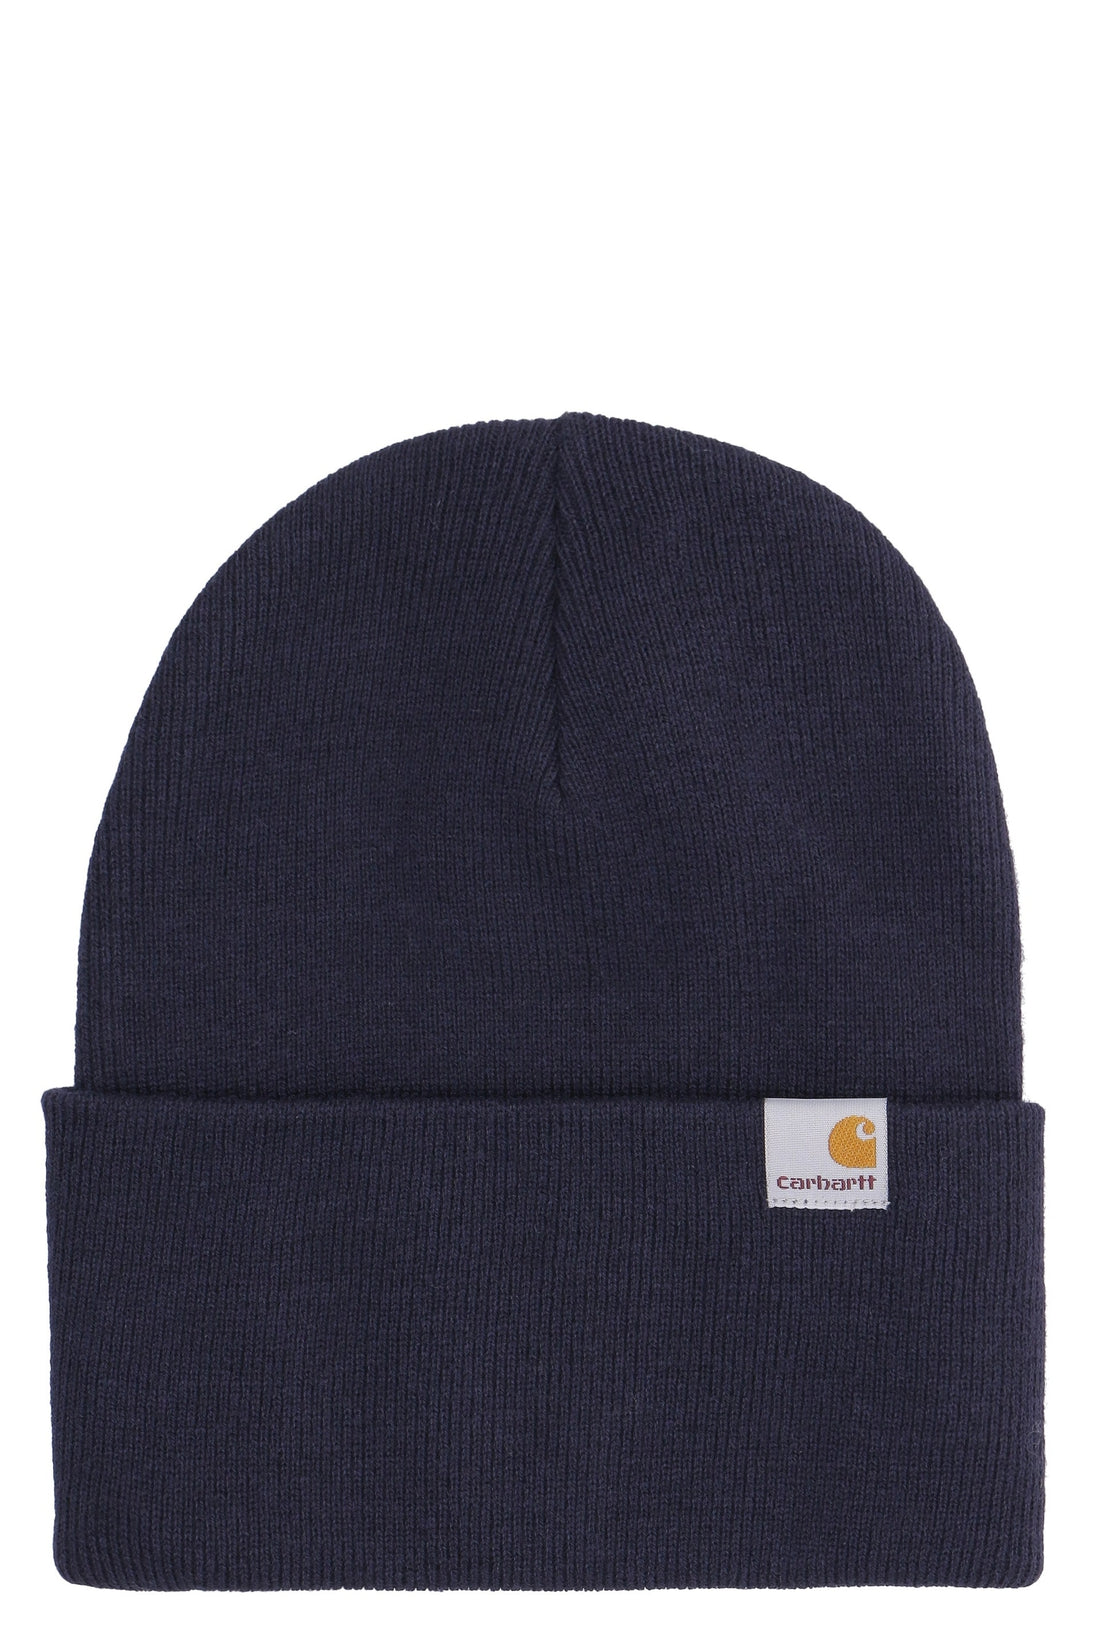 Carhartt-OUTLET-SALE-Ribbed knit beanie-ARCHIVIST